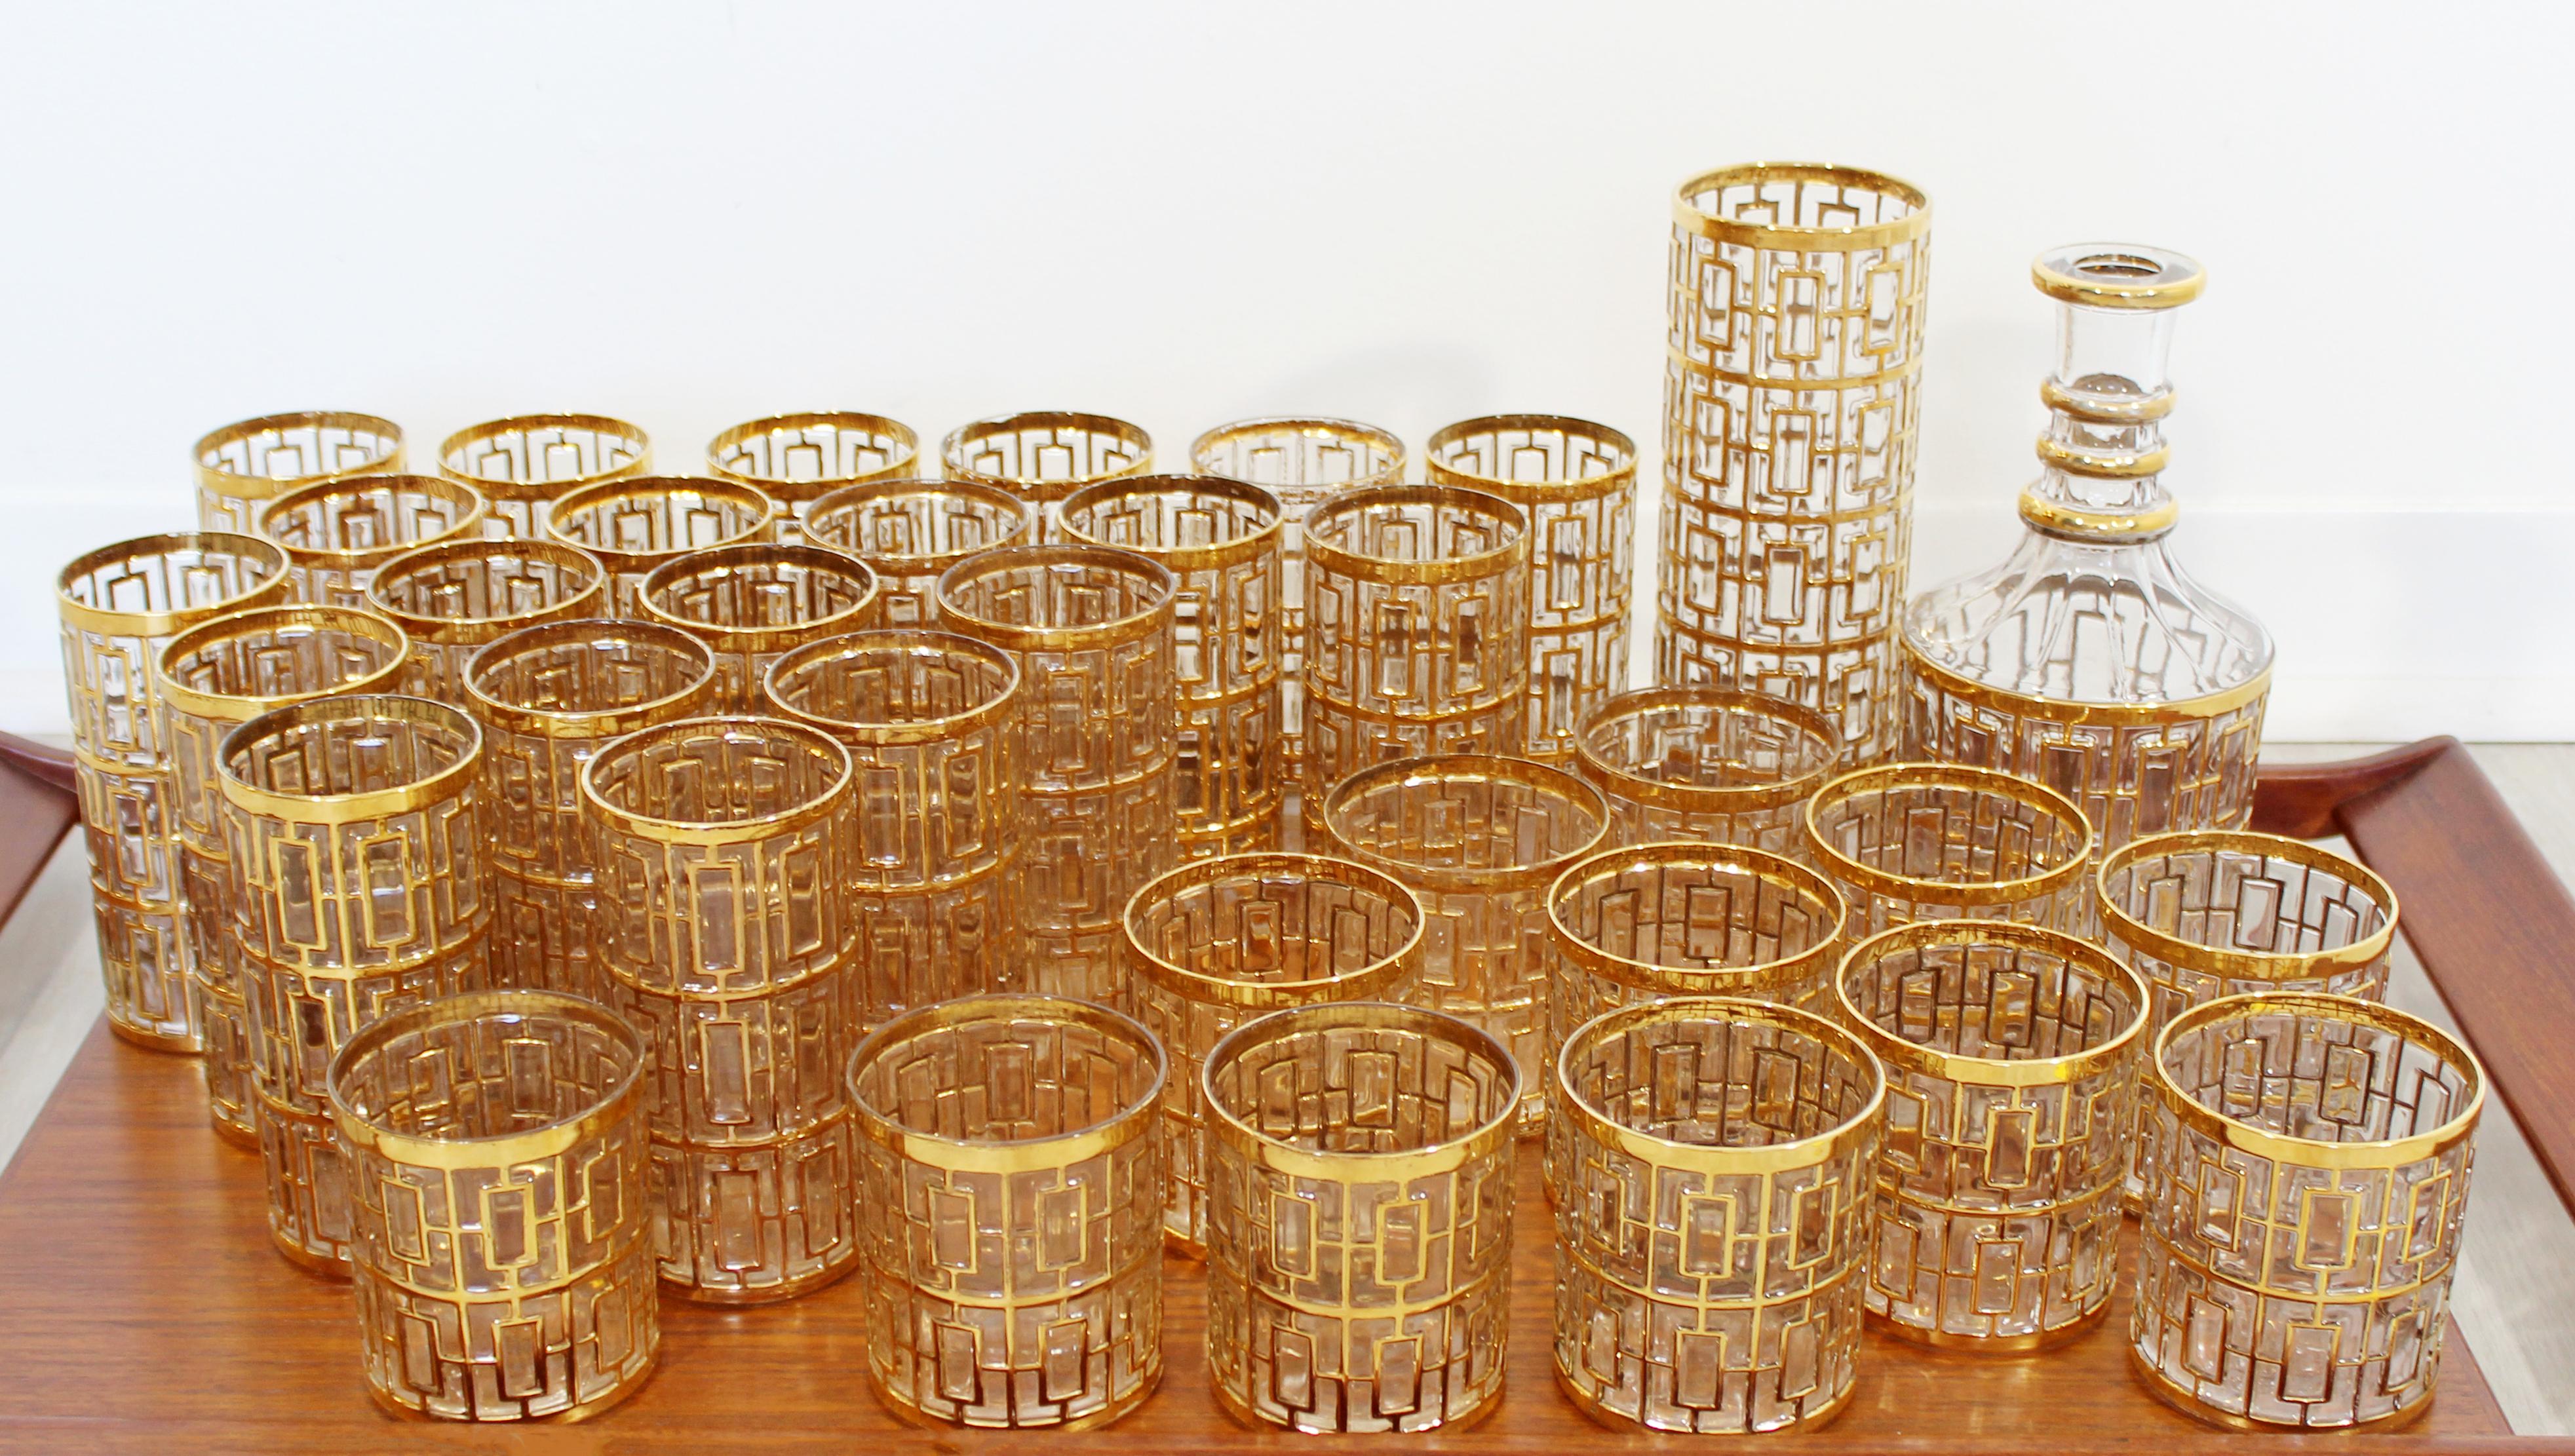 For your consideration is an incredible, complete set of 22-karat gold Shoji glasses, including twenty highball glasses, twelve glasses, one decanter with stopper and a tall cocktail mixer, circa 1960s. In very good condition. The dimensions of the